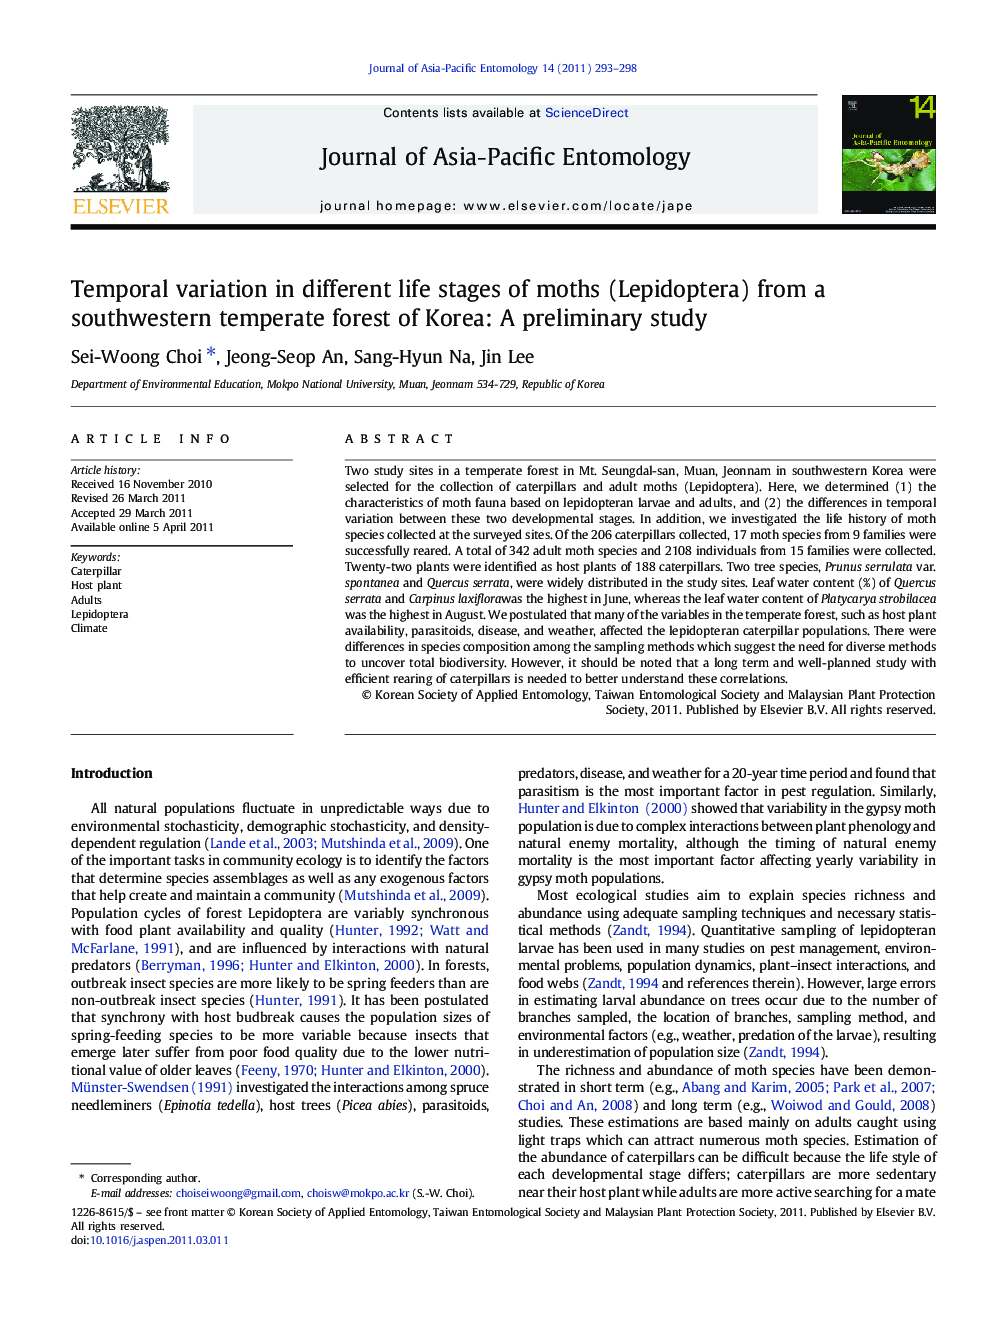 Temporal variation in different life stages of moths (Lepidoptera) from a southwestern temperate forest of Korea: A preliminary study